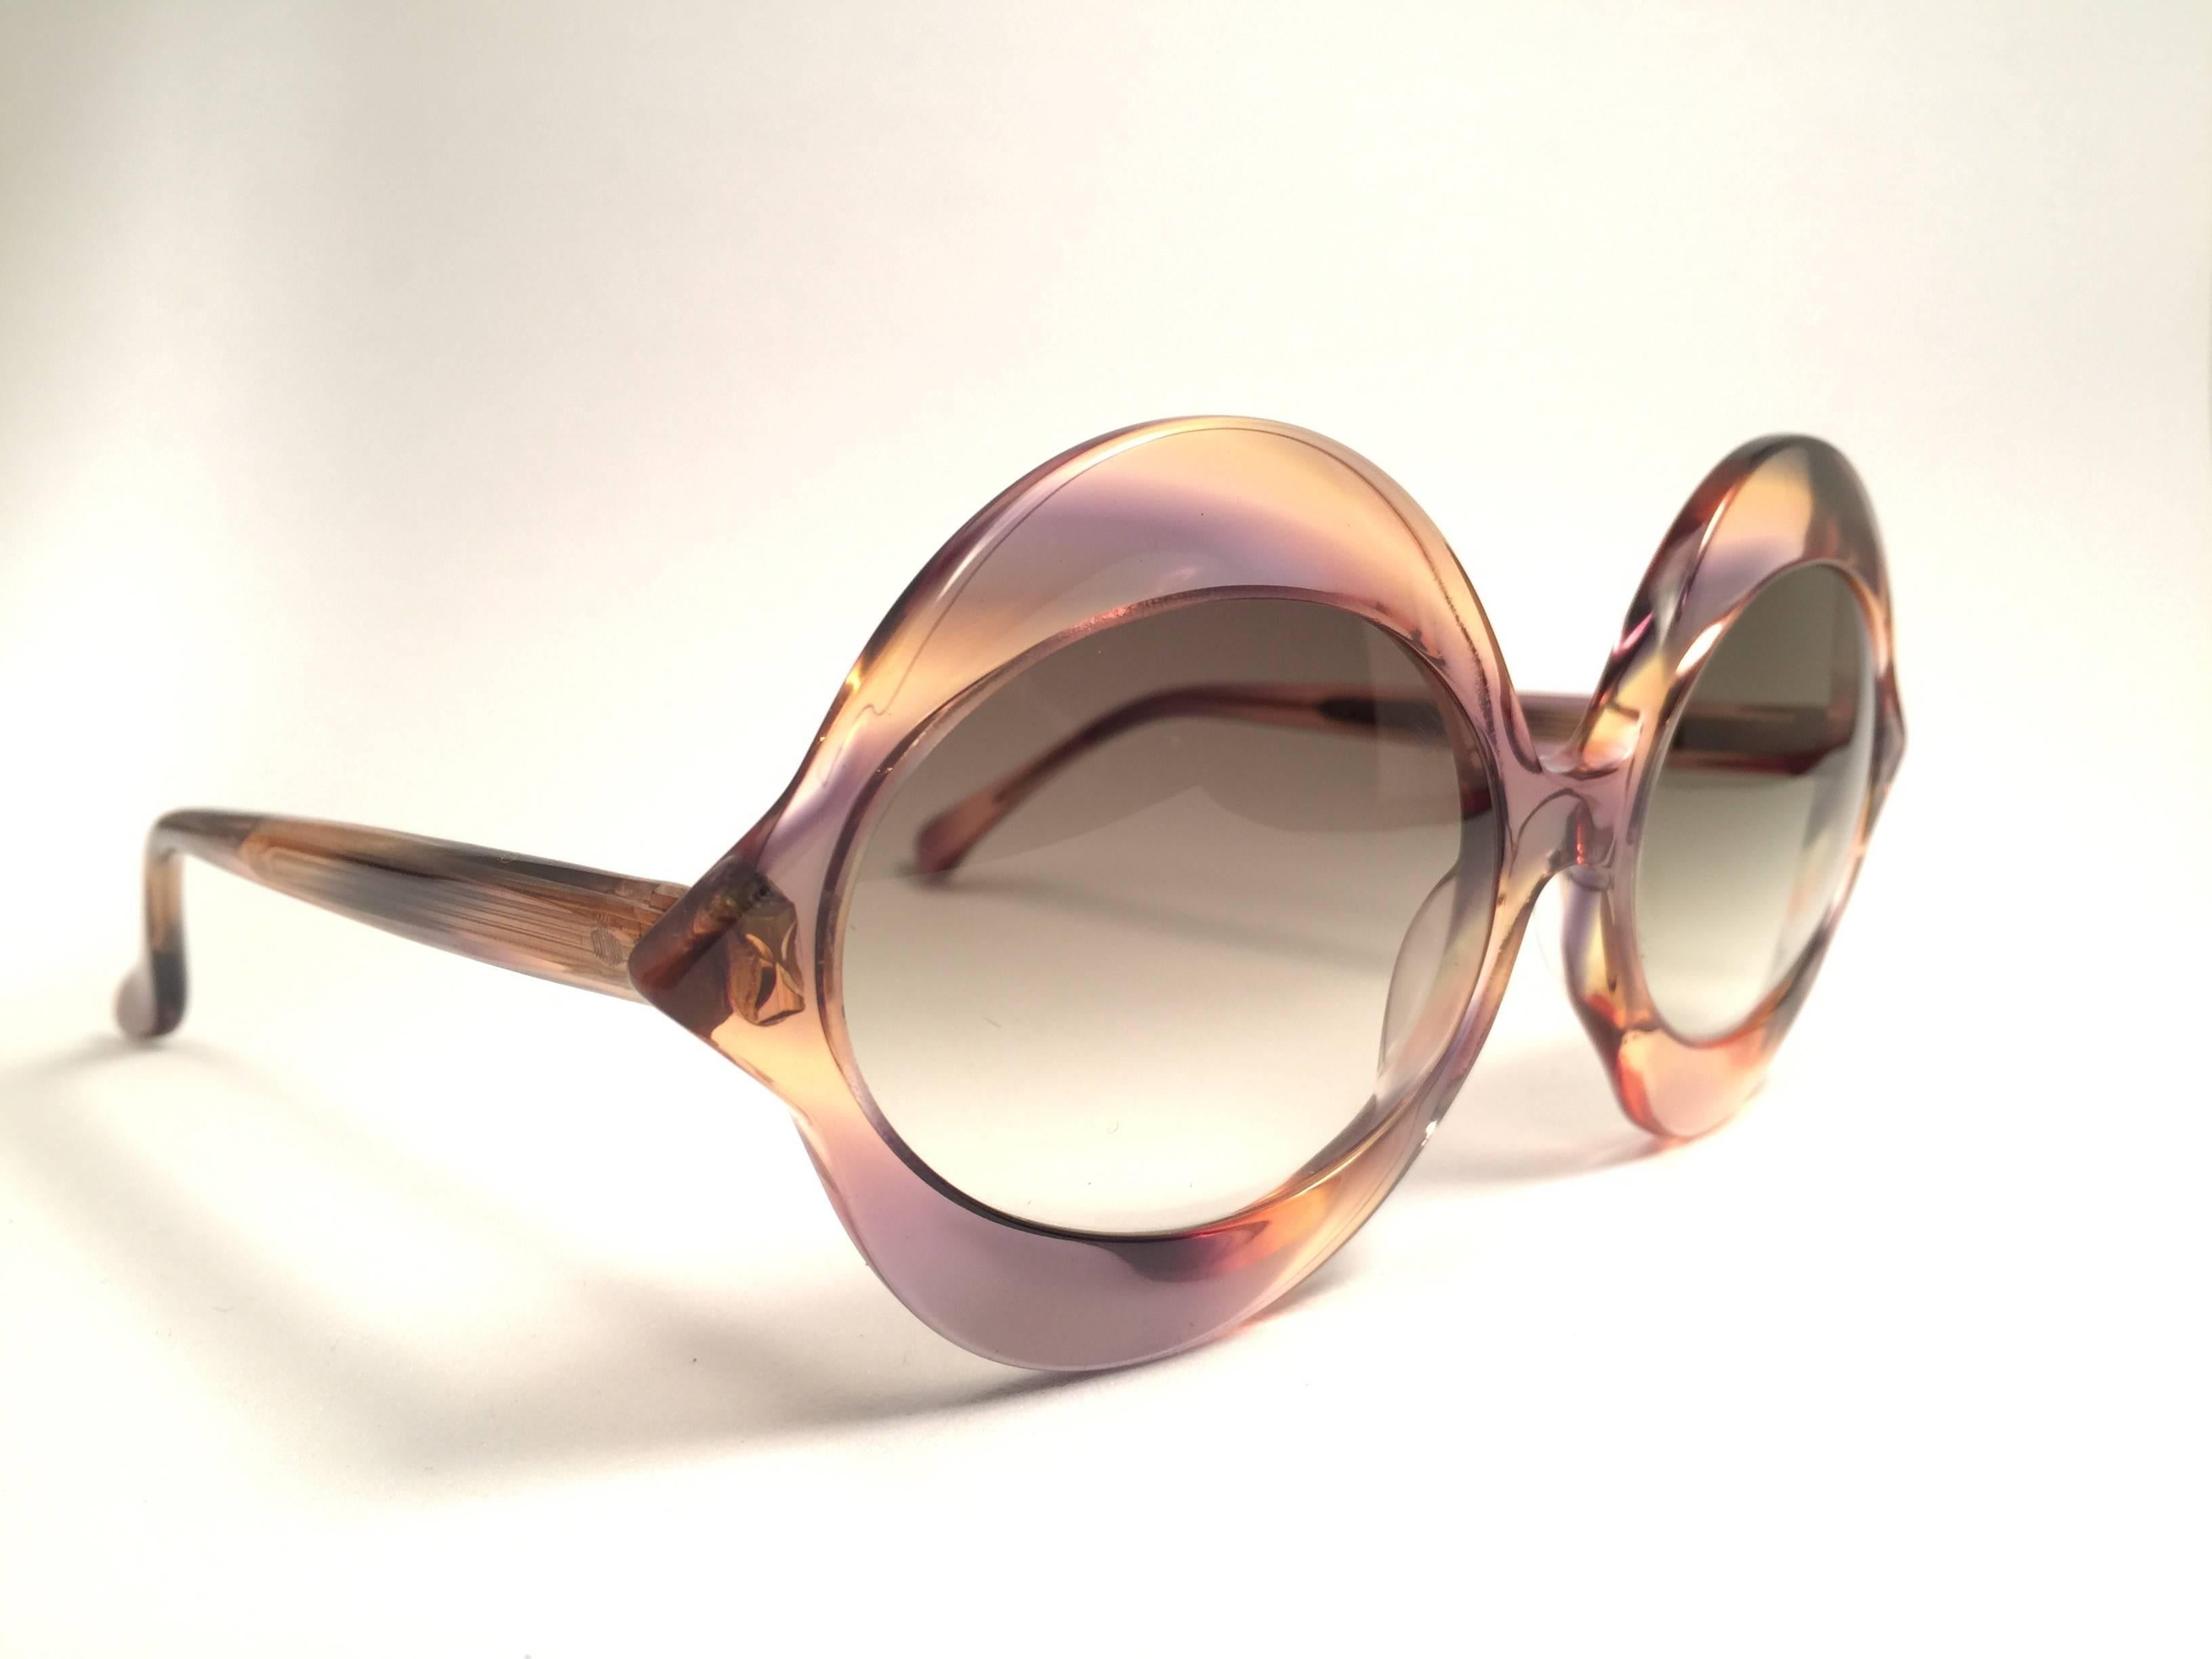 Vintage new Pierre Cardin lips with spotlesslenses Medium size 1960’s . 

Ultra rare design emulating a sleek and provocative pair of lips.  
New, never used or displayed this pair of vintage pierre cardin is a rare and sought after piece not to